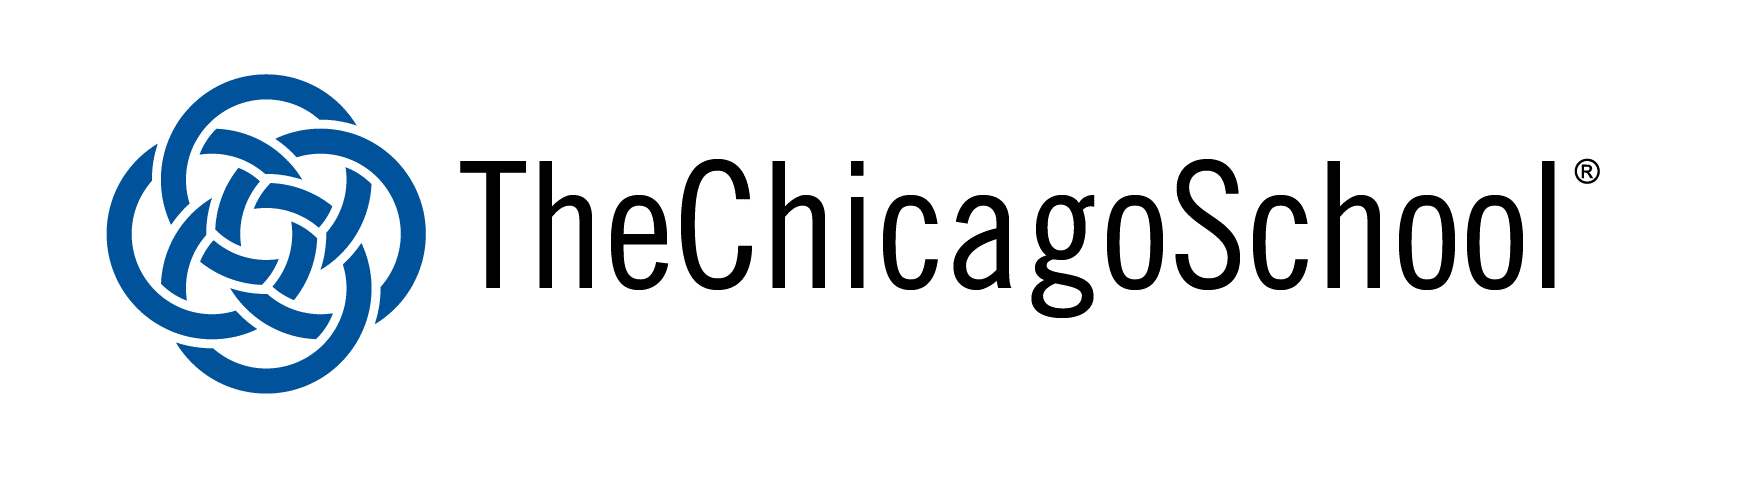 Ph.D. in Applied Behavior Analysis Program at The Chicago School of Professional Psychology